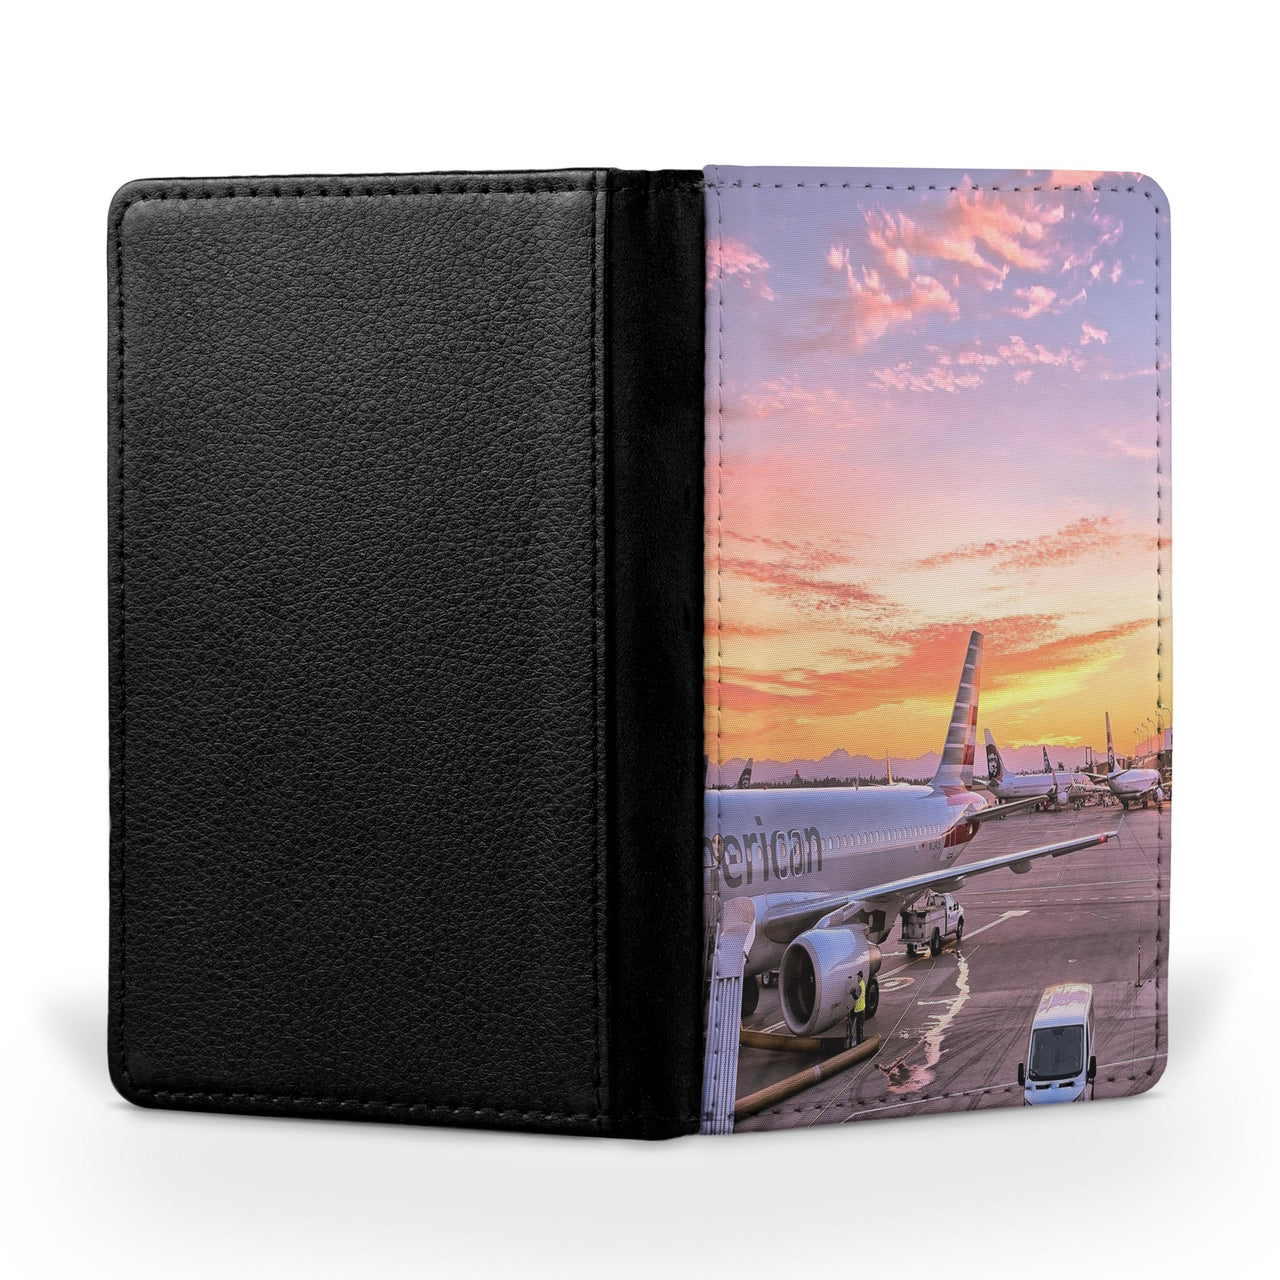 Airport Photo During Sunset Printed Passport & Travel Cases